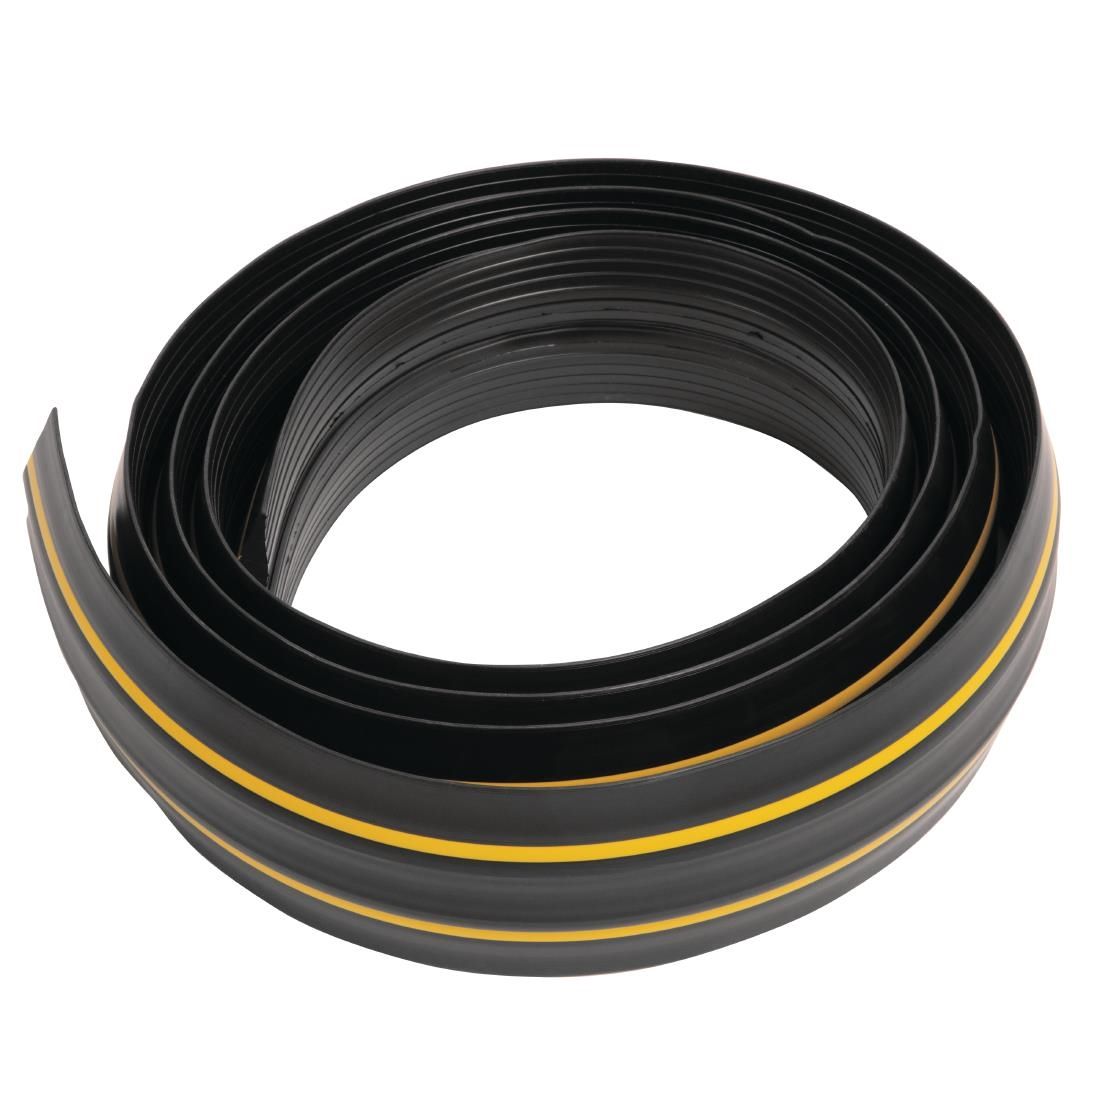 COBA CablePro GP Cable Protector Black and Yellow 3m JD Catering Equipment Solutions Ltd